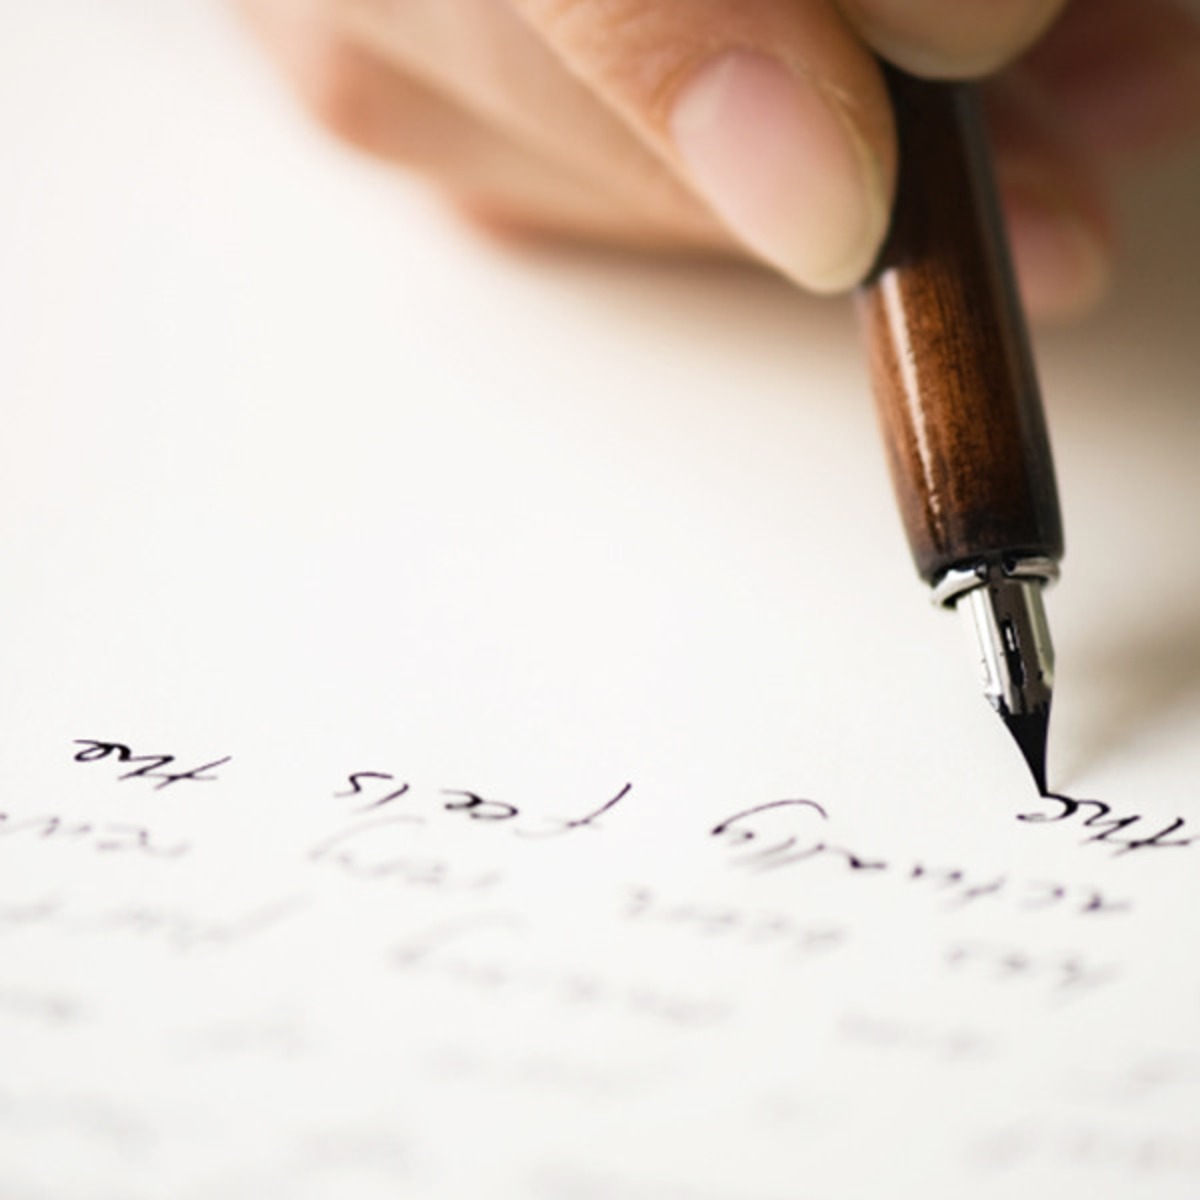 Cursive Handwriting Will No Longer Be Taught in Schools: Should It